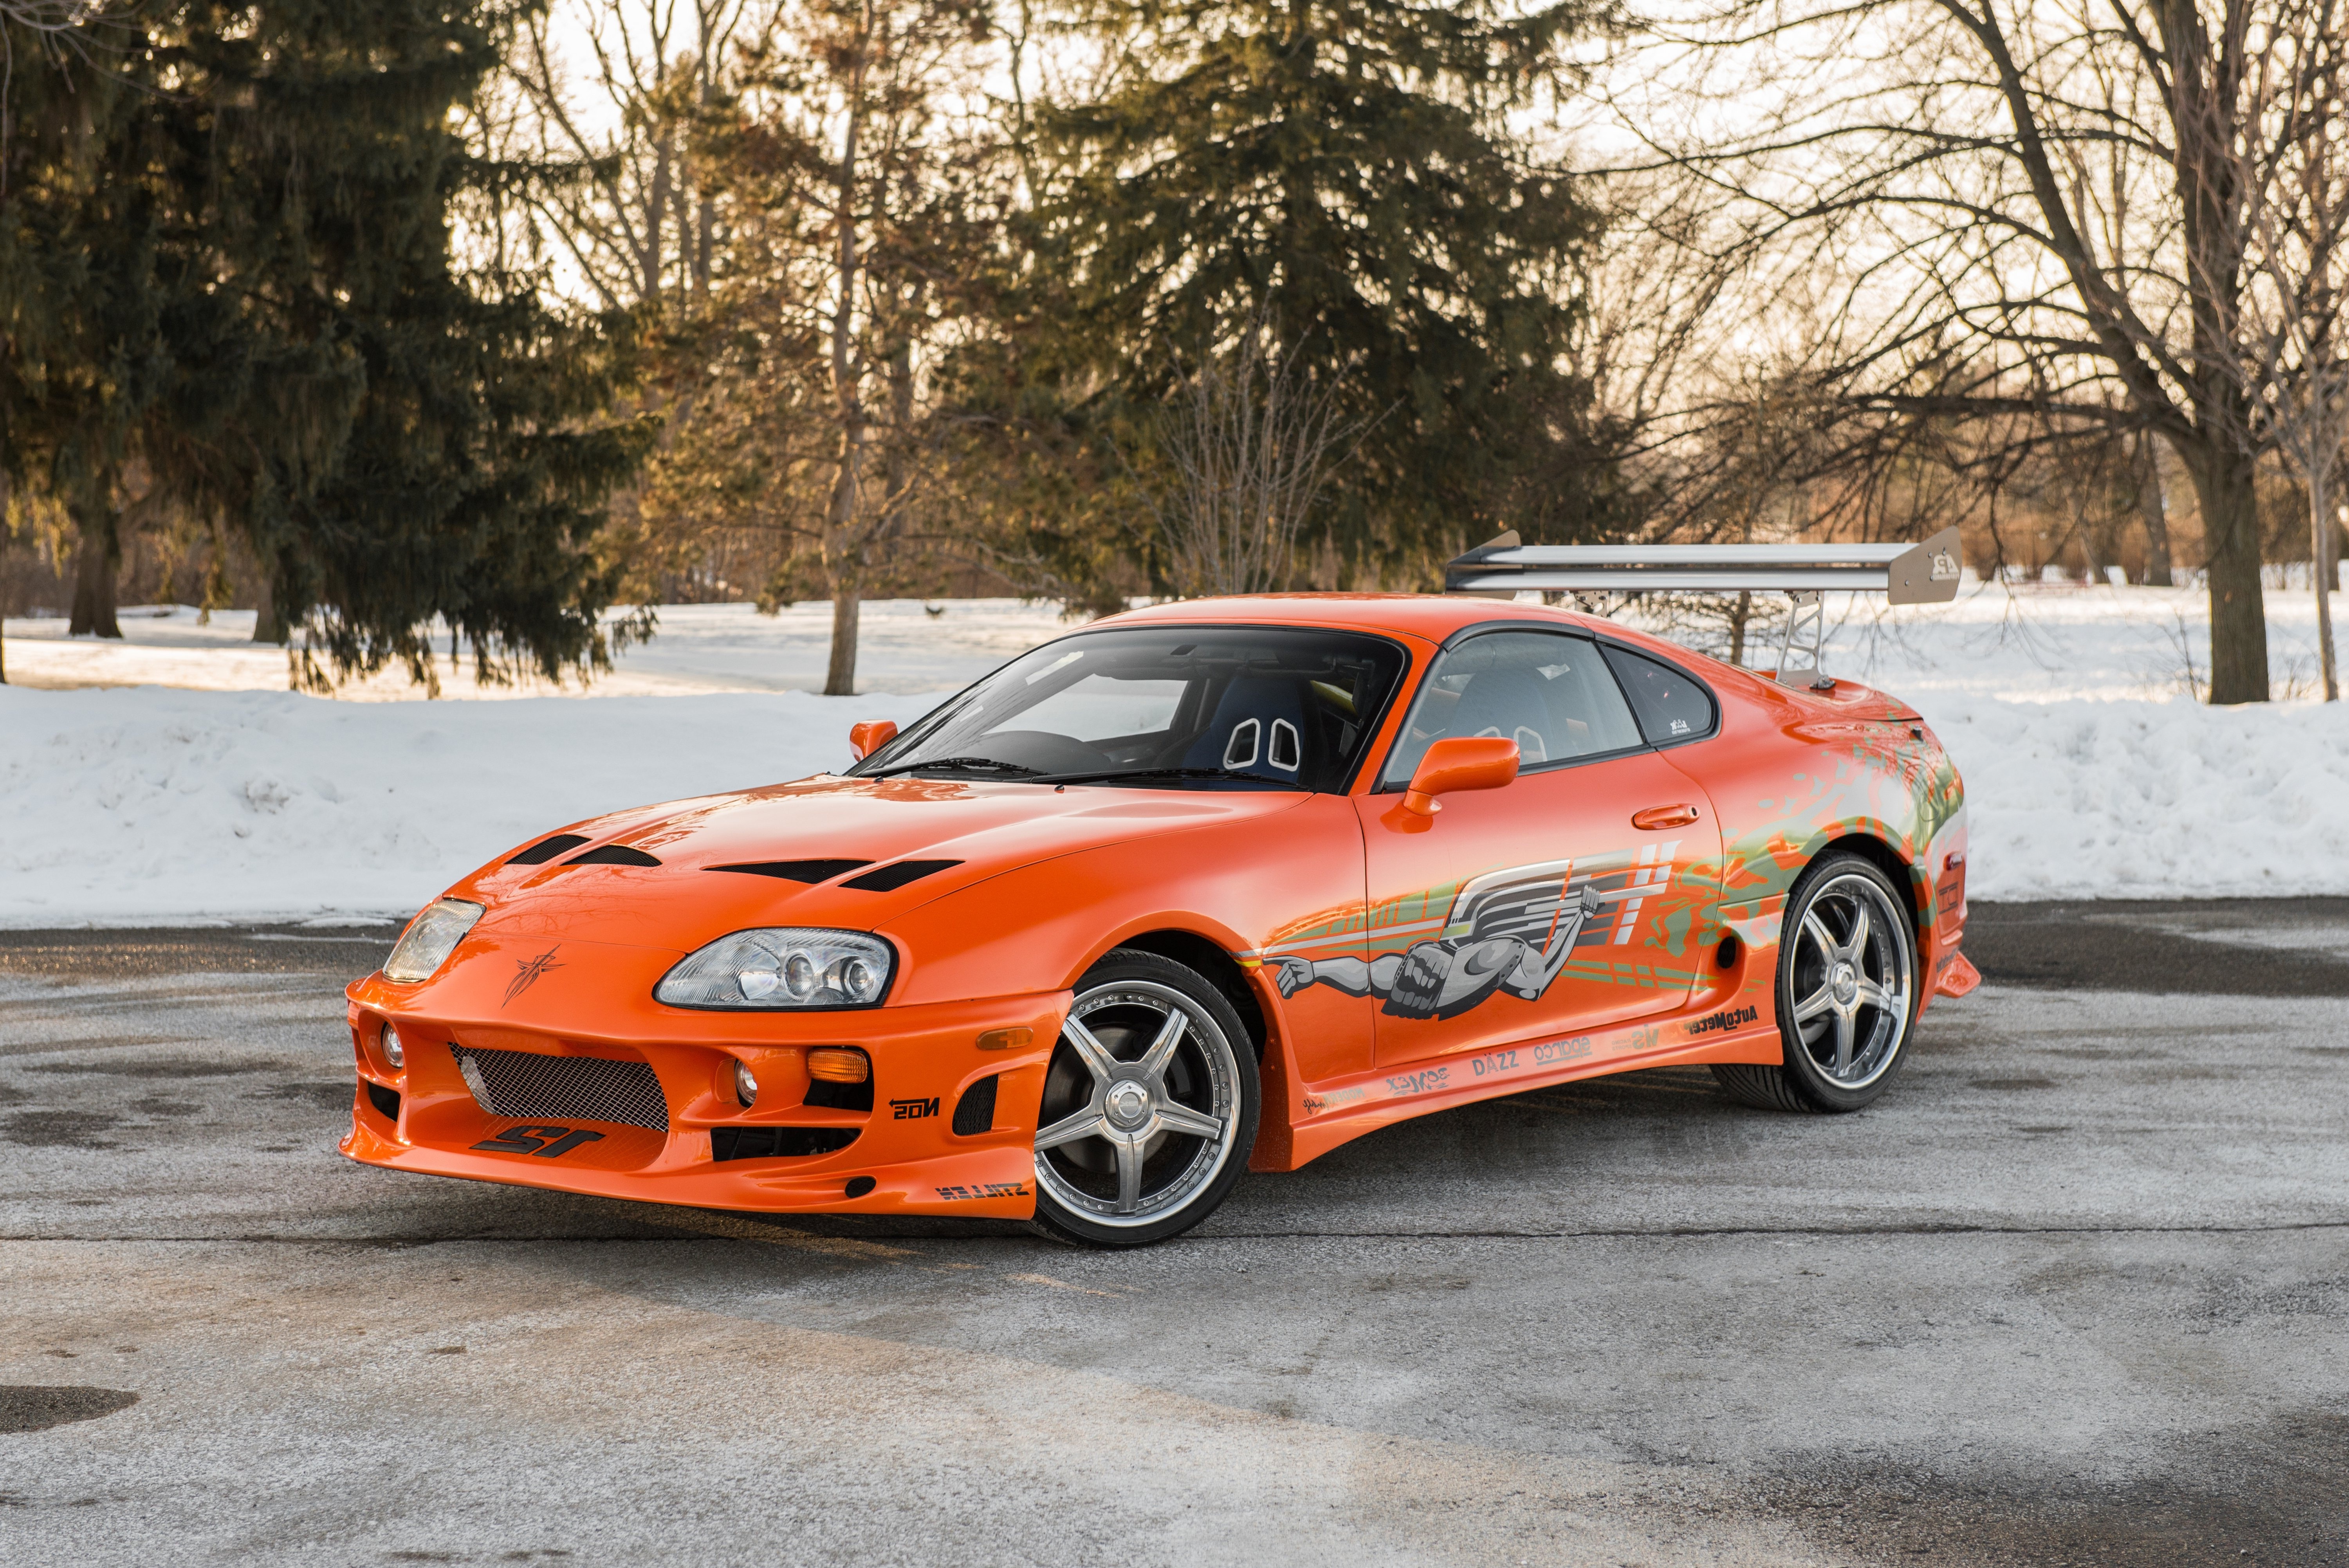 Wallpaper The Fast And The Furious, Racing, Toyota Supra, Orange, Cars:6000x4006